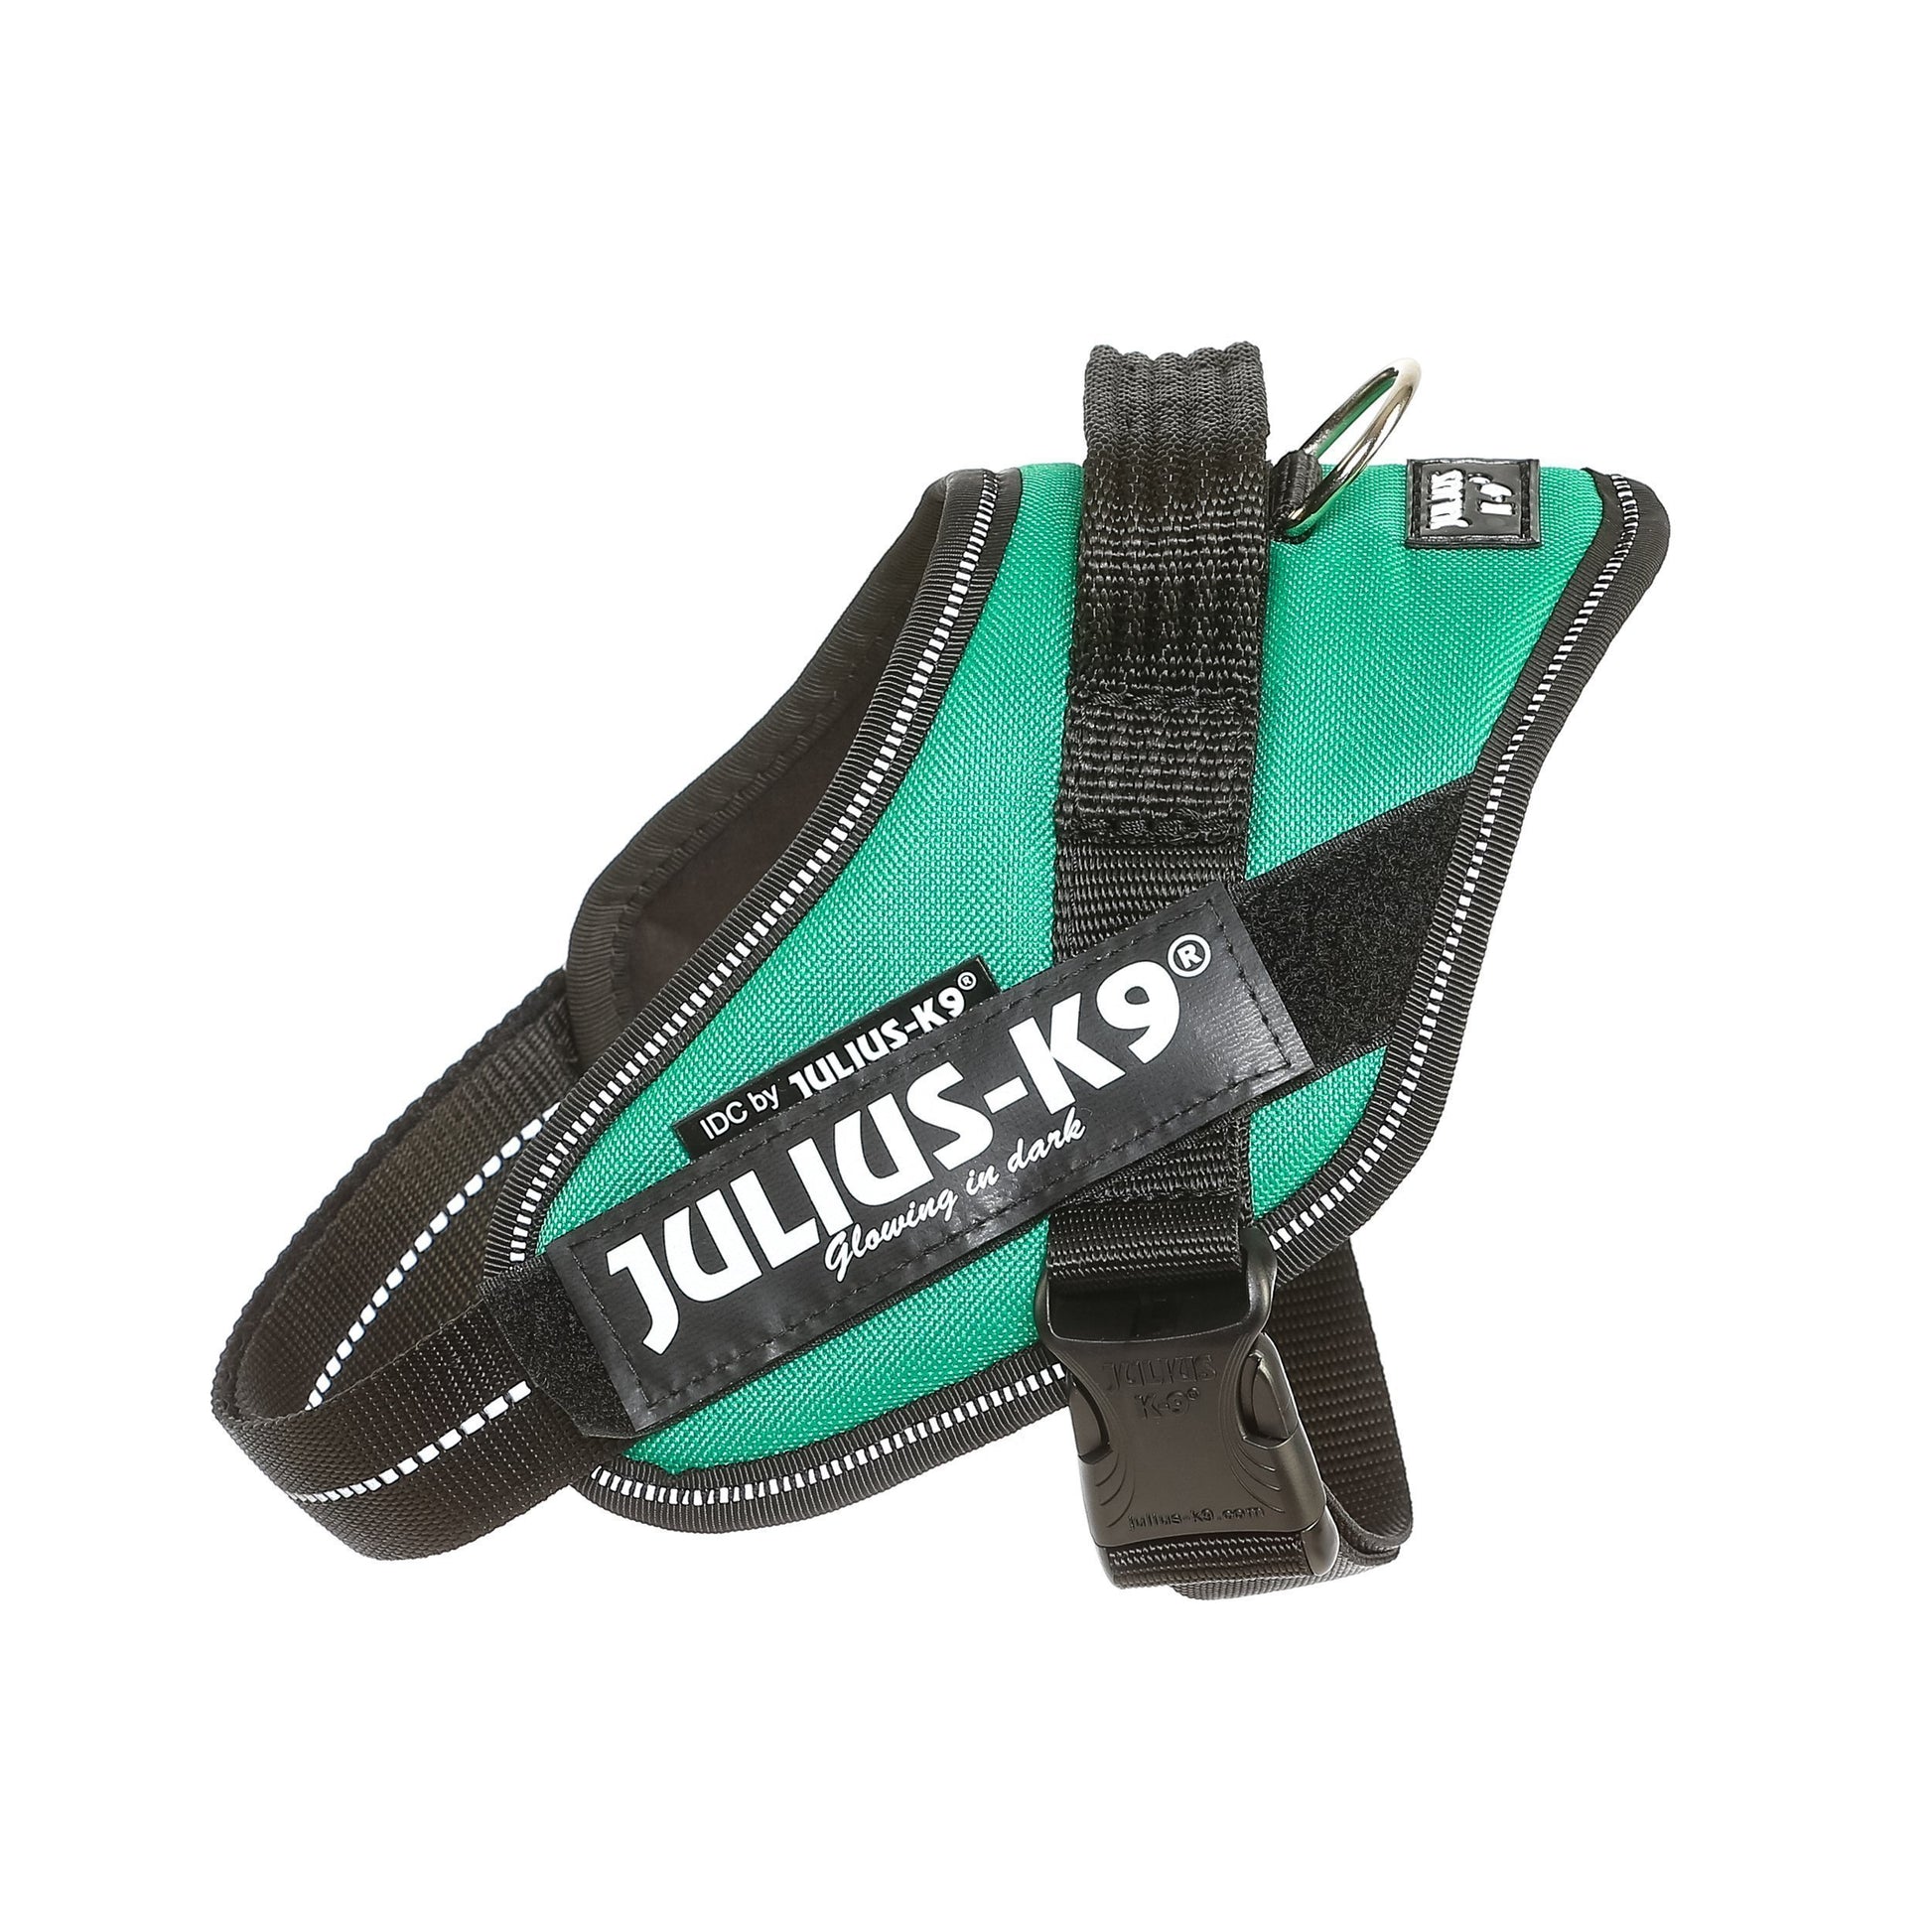 Try Tickless with the best Julius-K9 IDC Powerharnesses in the World!